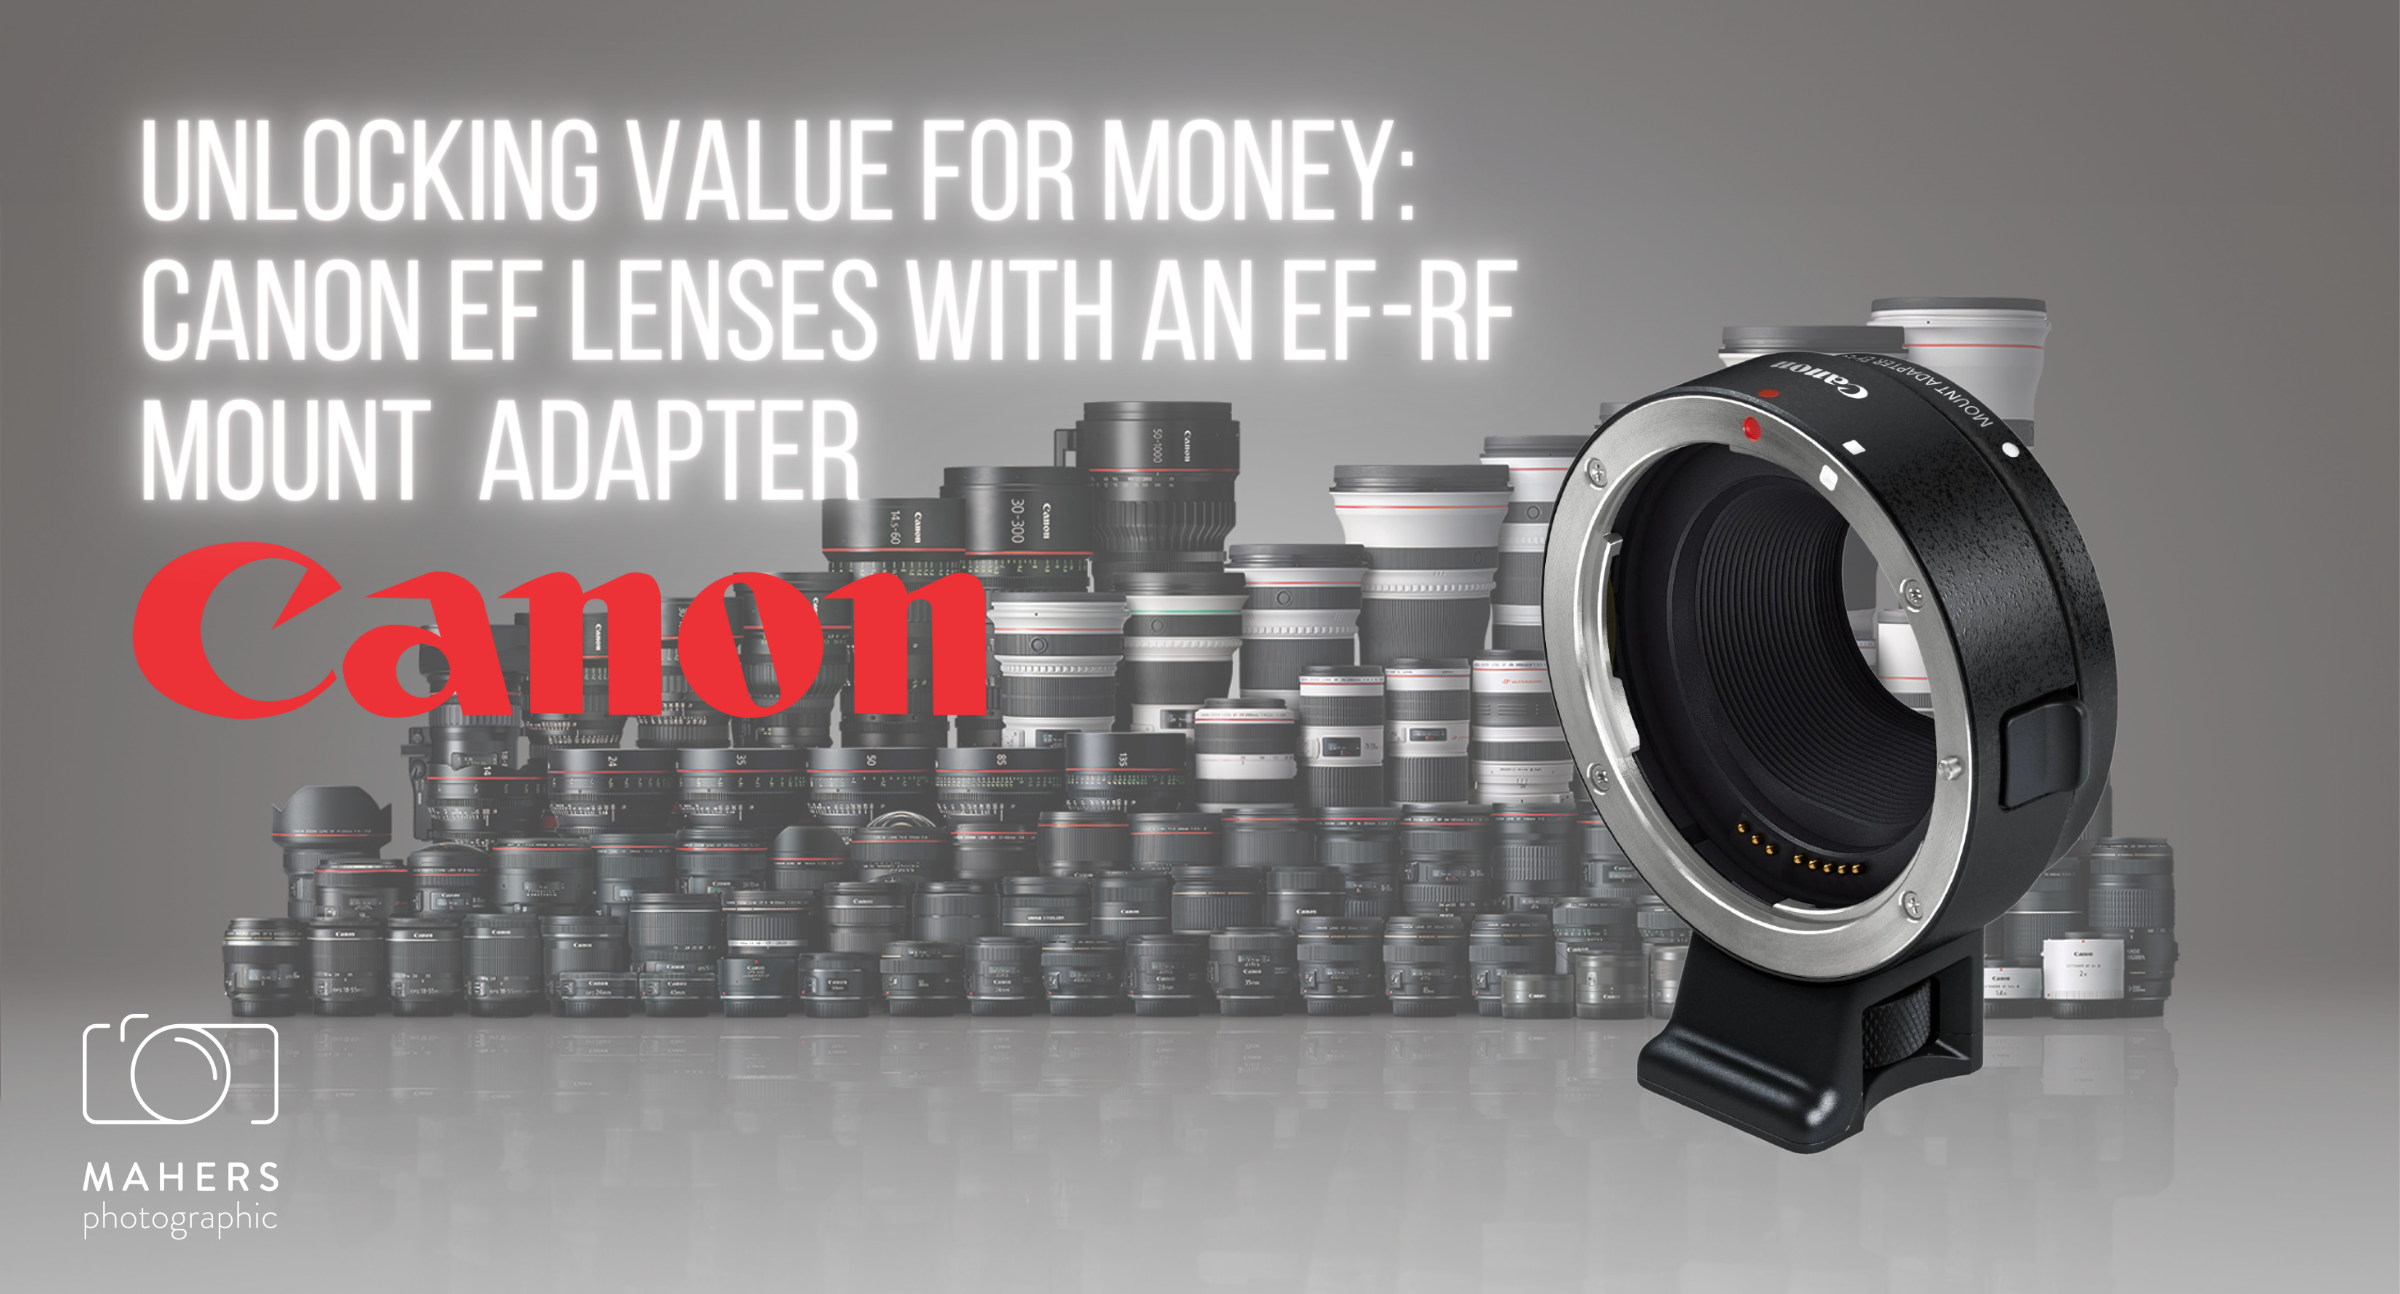 Unlocking Value for Money: Canon EF Lenses with an EF-RF Adapter